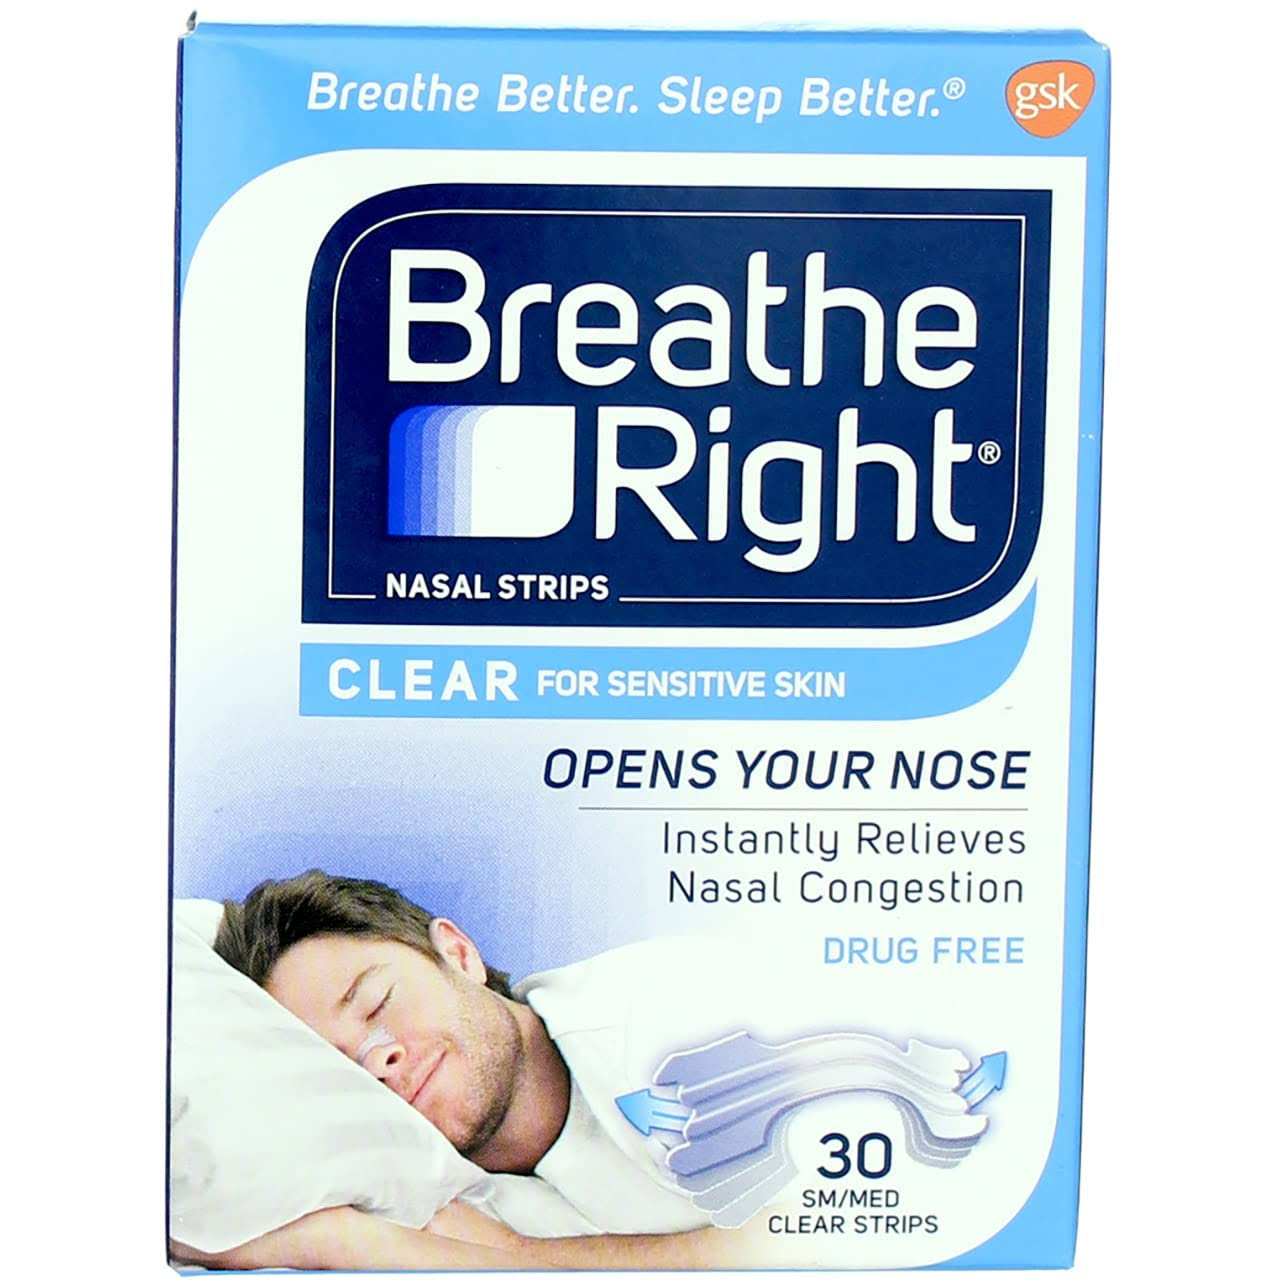 Gsk Breathe Right Nasal Strips - 30 Pack, Clear